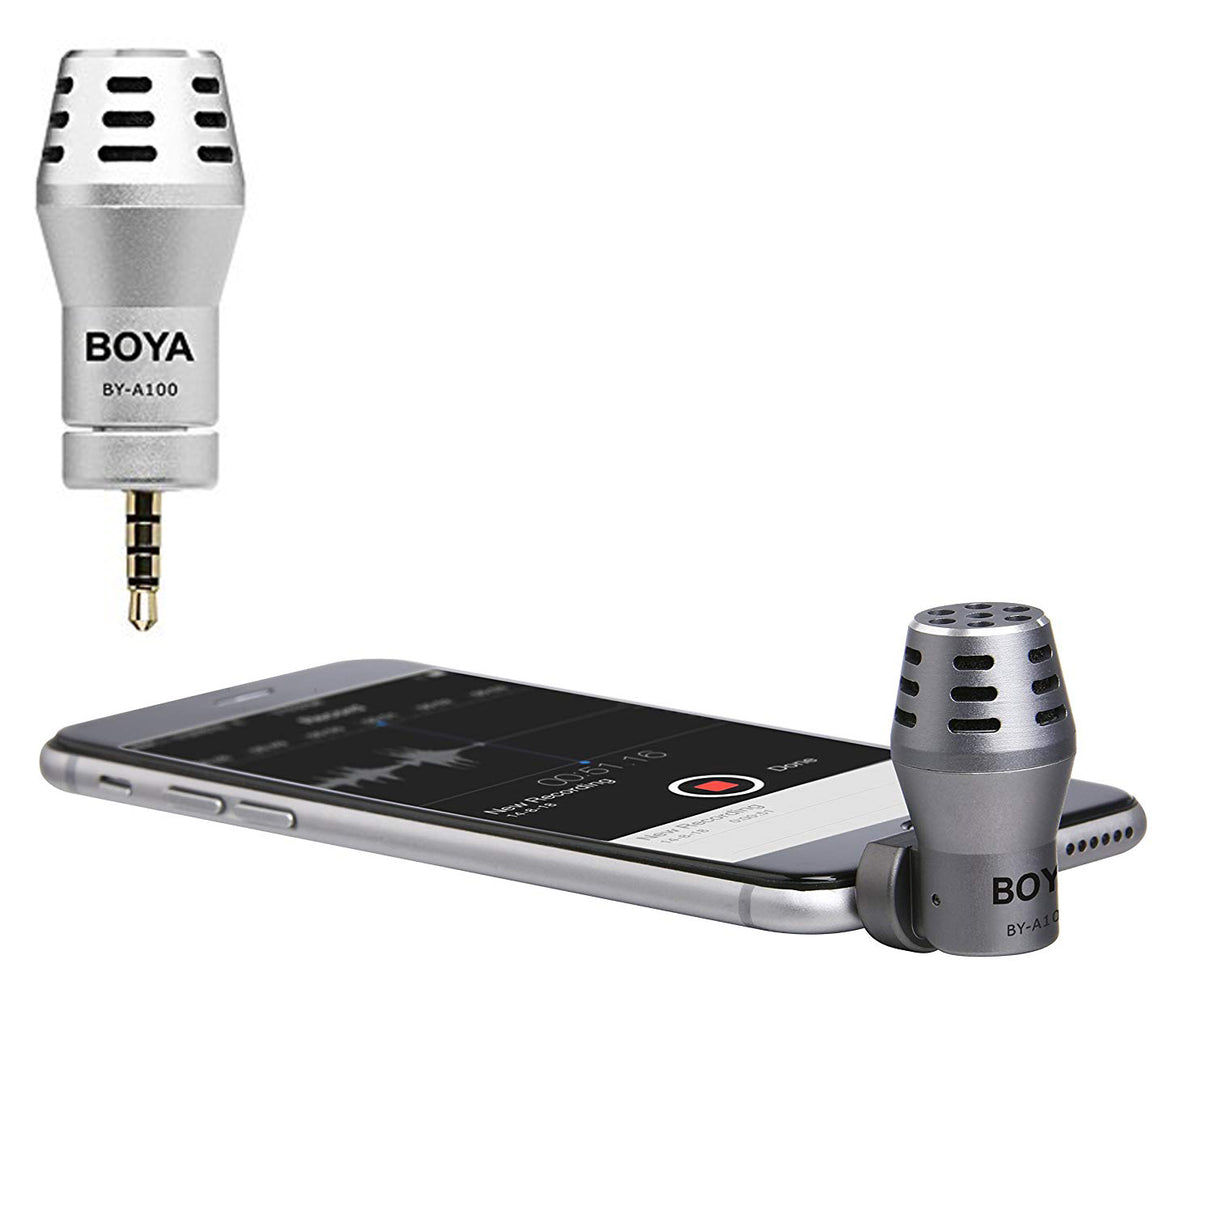 BOYA BY-A100 Omni Directional Condenser Microphone for IOS Android Smartphones ( Grey)